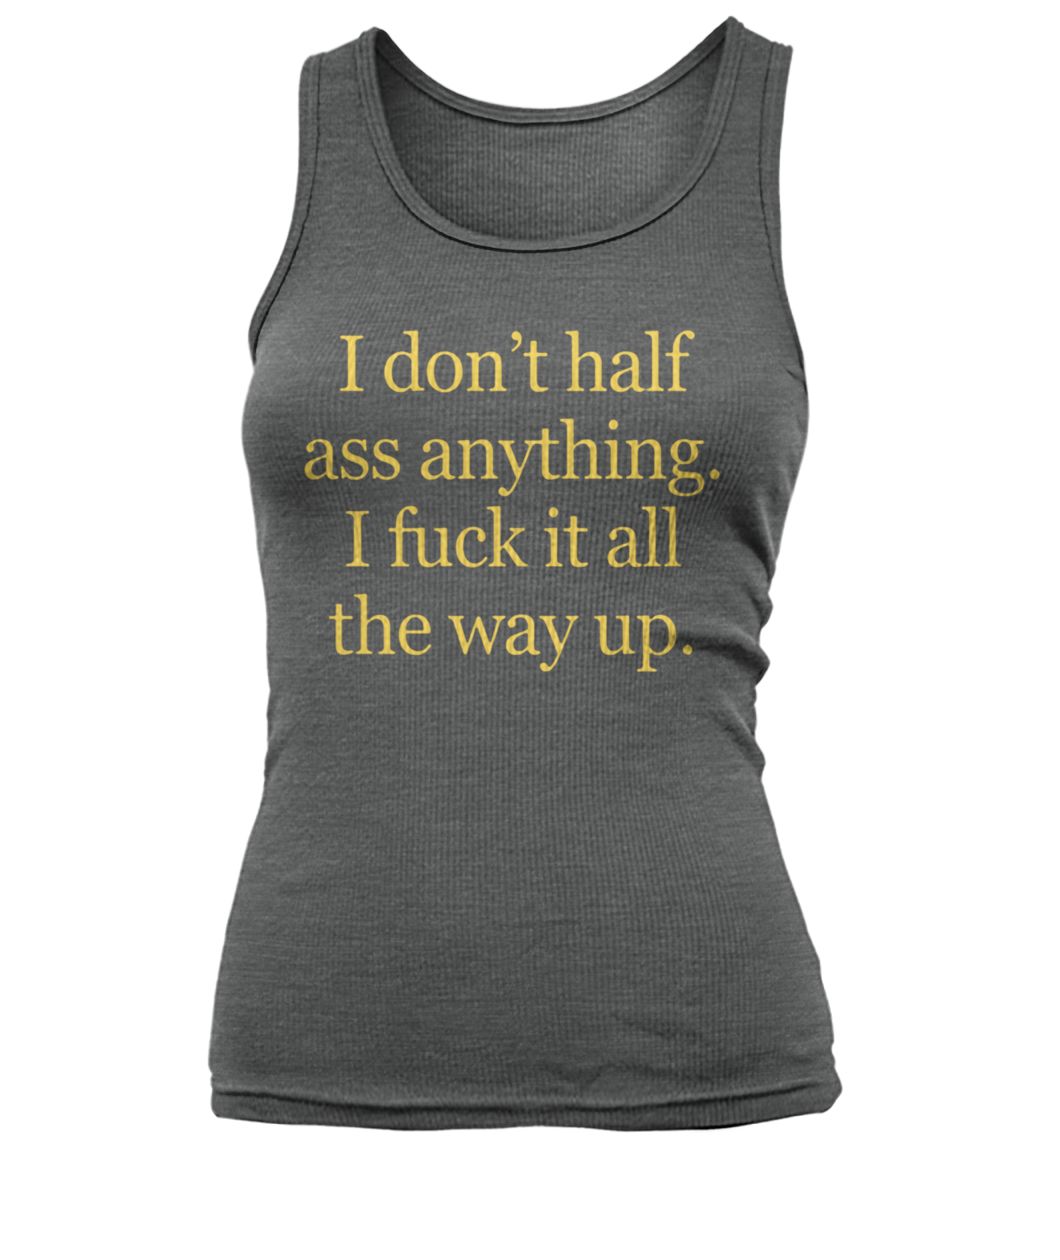 I don't half ass anything I fuck it all the way up women's tank top